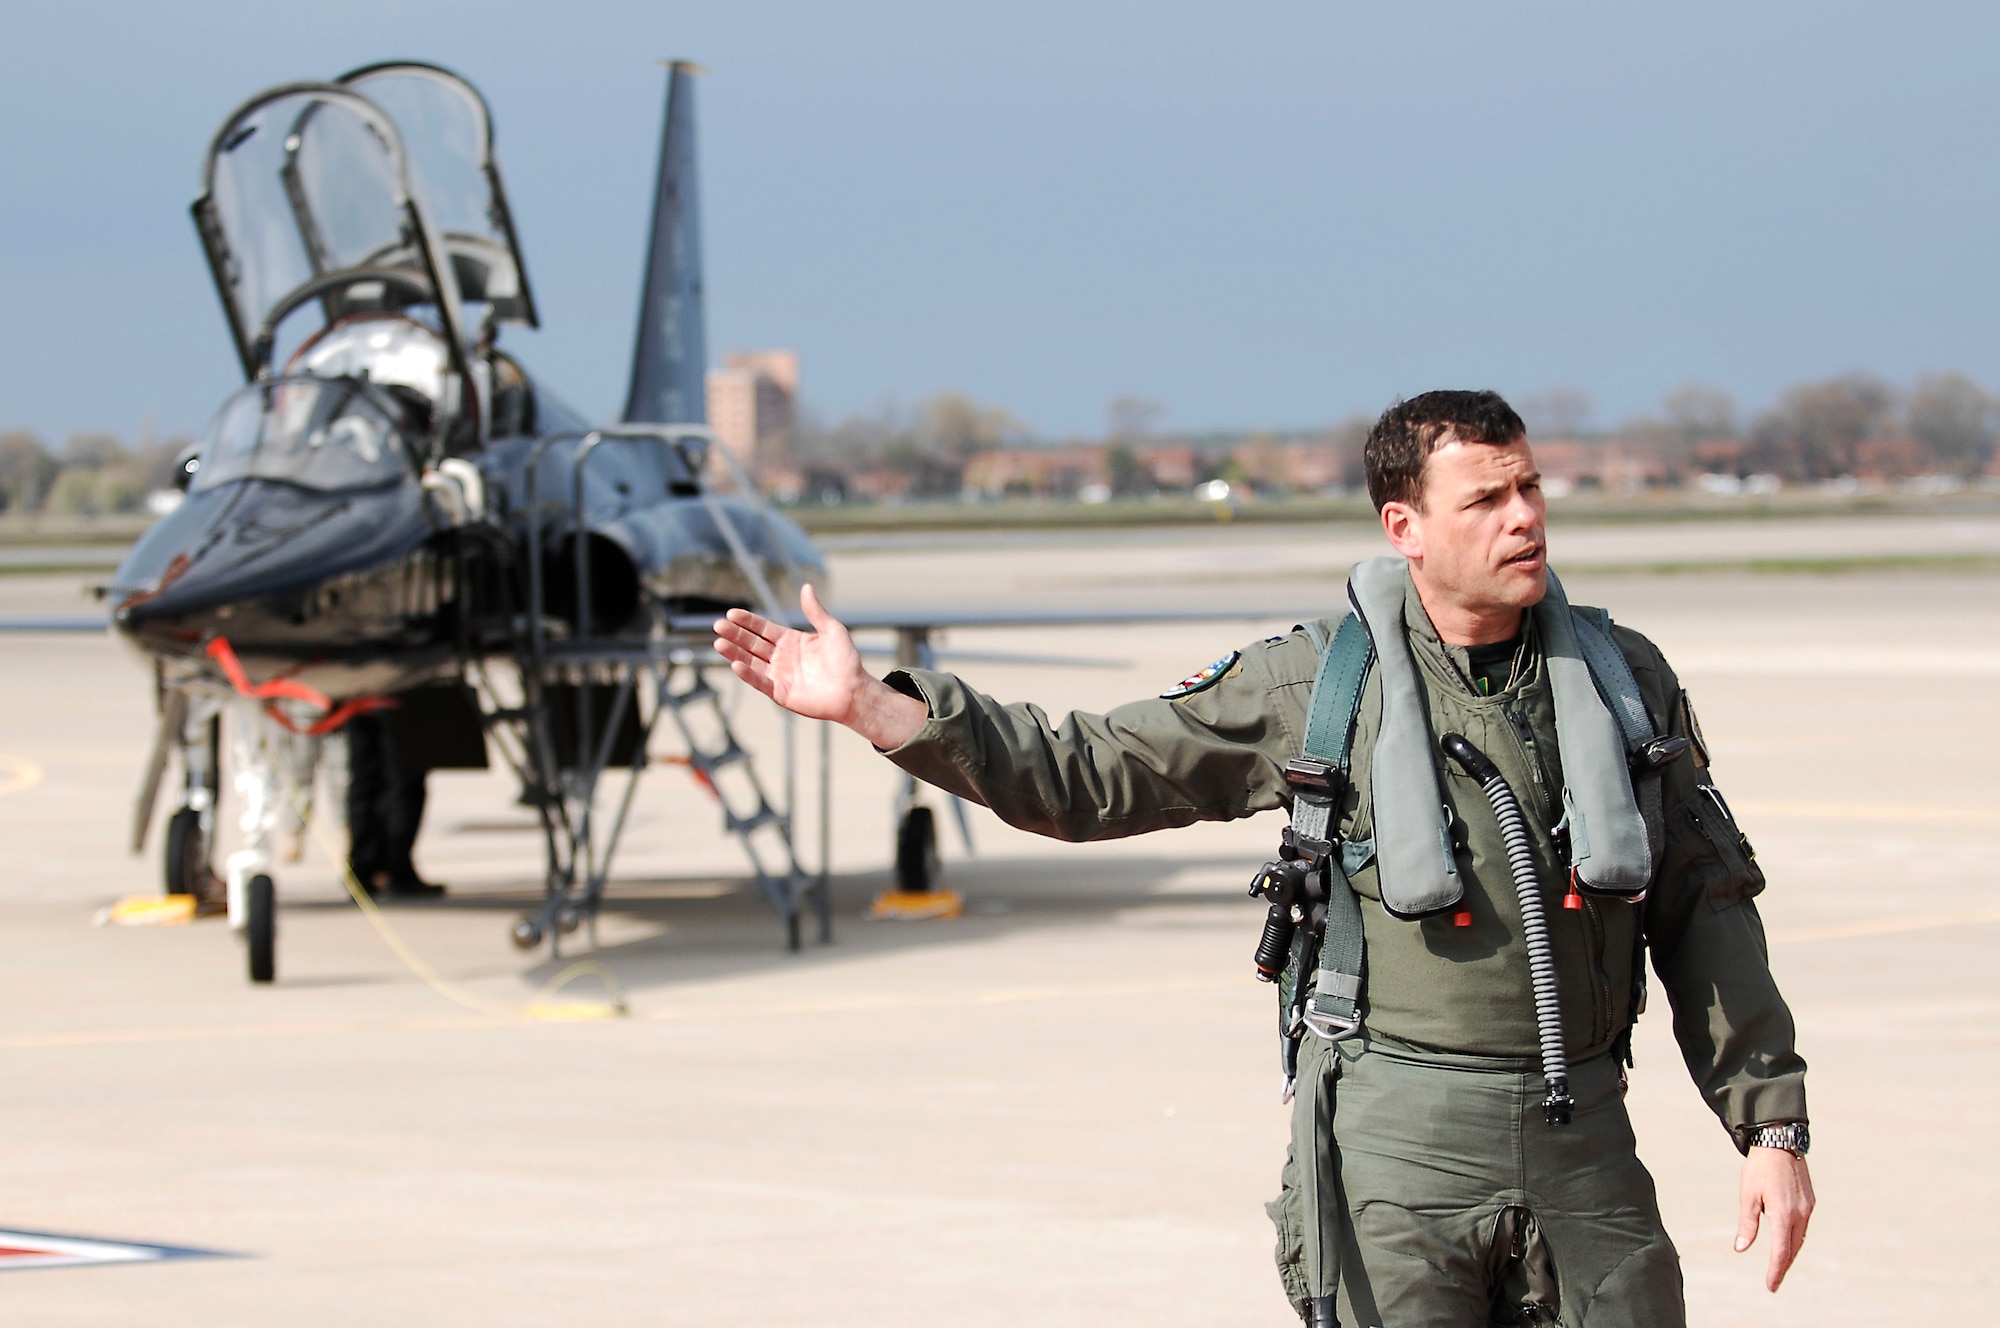 Col. Matthew Molloy, 1st Fighter Wing commander, presents the T-38 Talon at Langley Air Force Base, Va., April 1, 2011. The T-38, from Holloman AFB, N.M., is TDY here for six months to help train 1st FW pilots and prepare them for when it is permanently stationed here. (U.S. Air Force photo by Airman 1st Class Kayla Newman/Released)